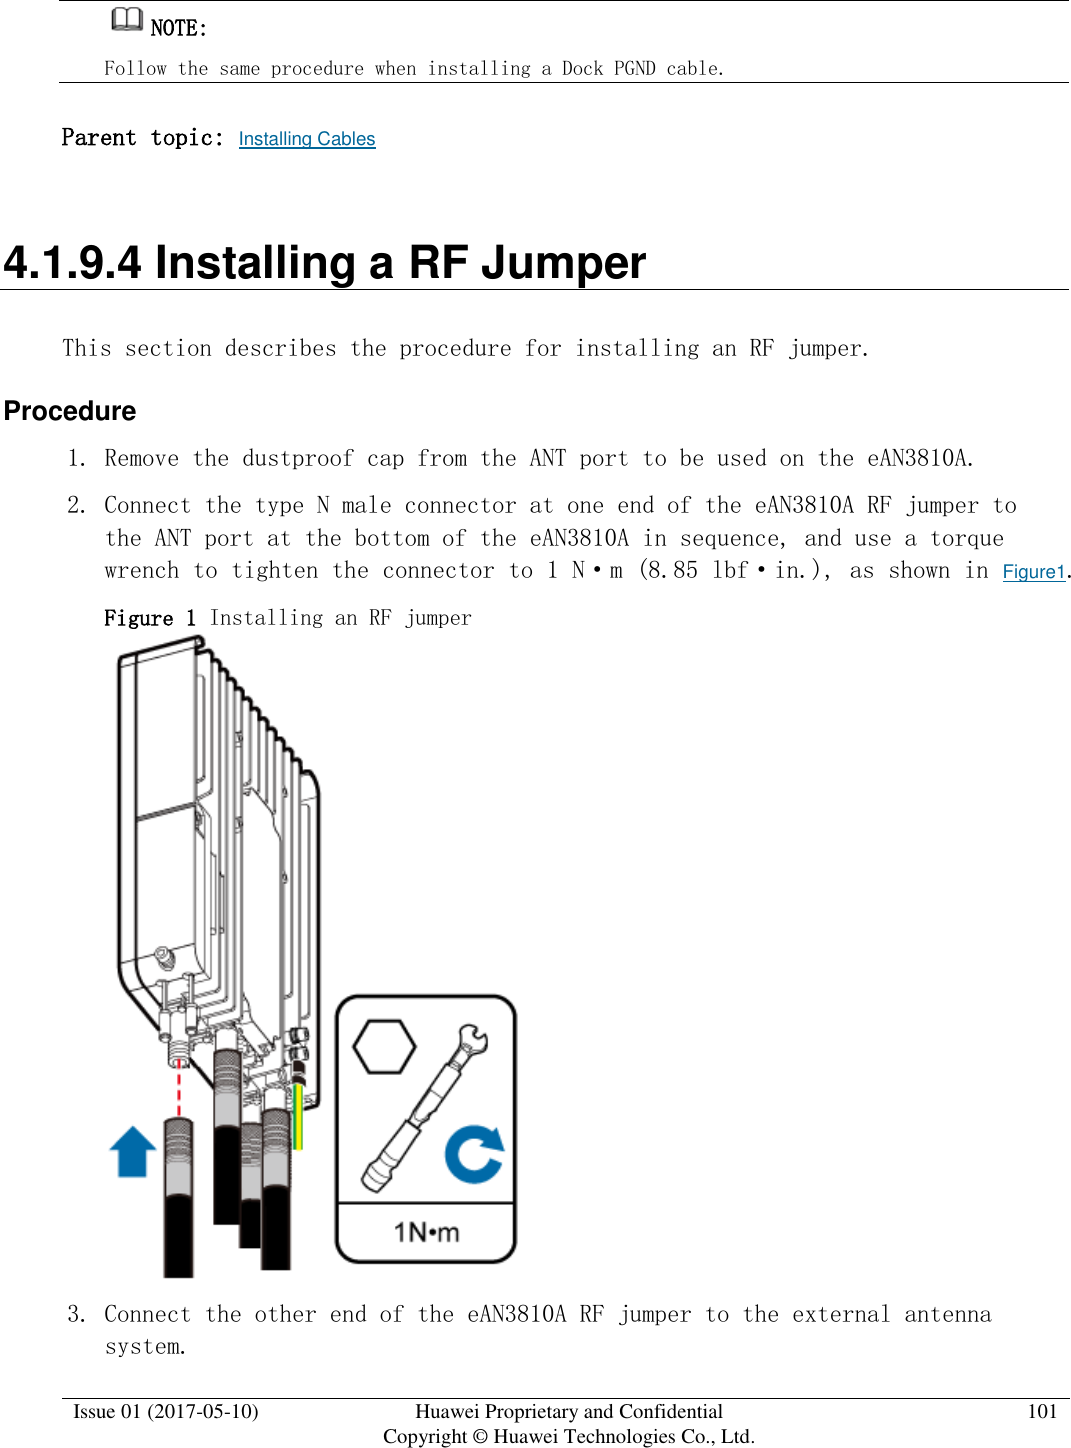  Issue 01 (2017-05-10) Huawei Proprietary and Confidential      Copyright © Huawei Technologies Co., Ltd. 101  NOTE:  Follow the same procedure when installing a Dock PGND cable. Parent topic: Installing Cables 4.1.9.4 Installing a RF Jumper This section describes the procedure for installing an RF jumper. Procedure 1. Remove the dustproof cap from the ANT port to be used on the eAN3810A.  2. Connect the type N male connector at one end of the eAN3810A RF jumper to the ANT port at the bottom of the eAN3810A in sequence, and use a torque wrench to tighten the connector to 1 N·m (8.85 lbf·in.), as shown in Figure1.  Figure 1 Installing an RF jumper   3. Connect the other end of the eAN3810A RF jumper to the external antenna system. 